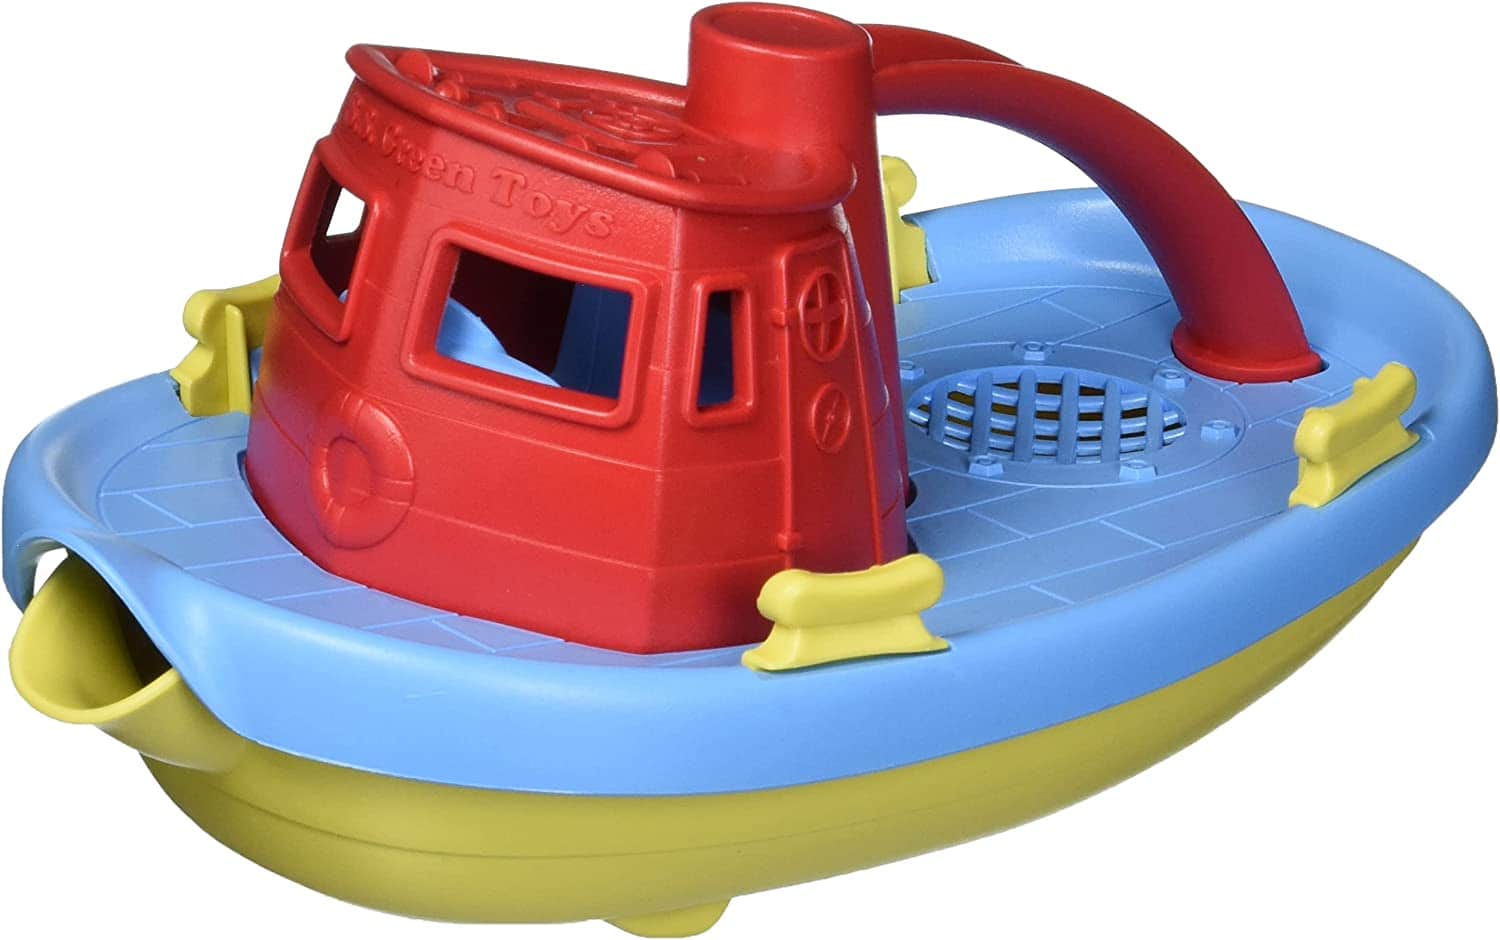 Red, blue, and yellow toy tug boat. 